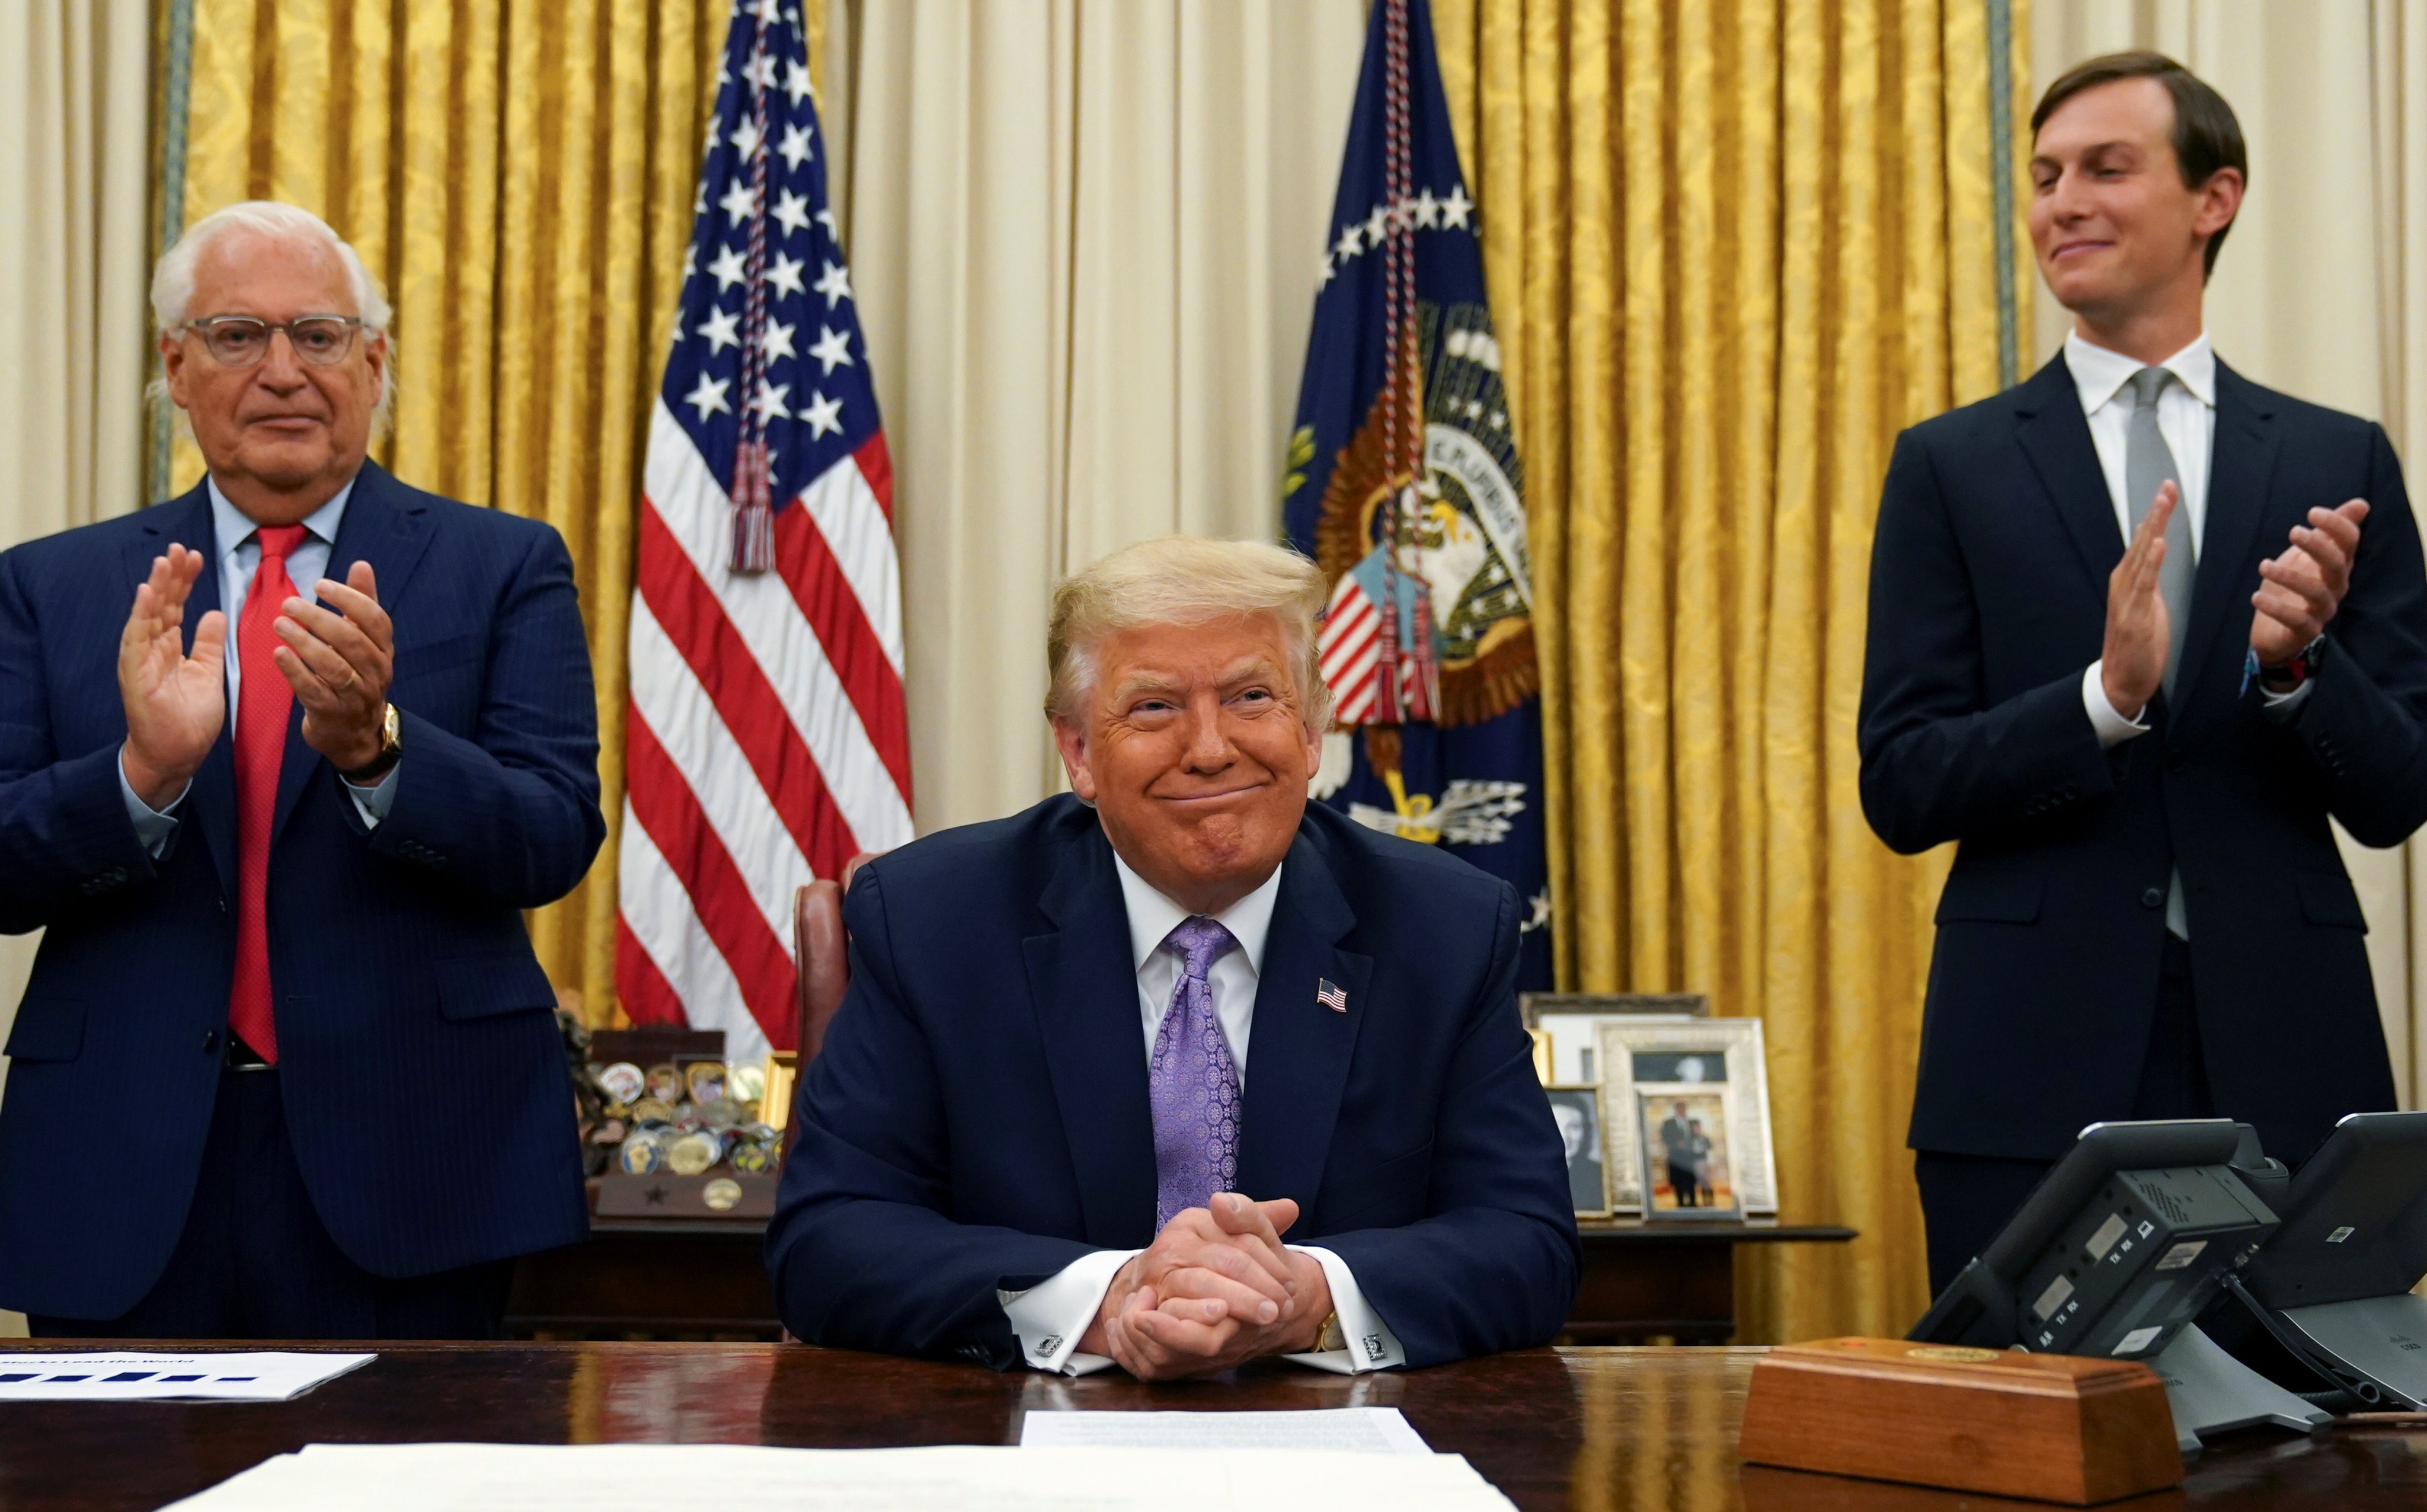 Then president Donald Trump is applauded by his ambassador to Israel David Friedman and White House senior adviser Jared Kushner on August 13, 2020. Photo: Reuters